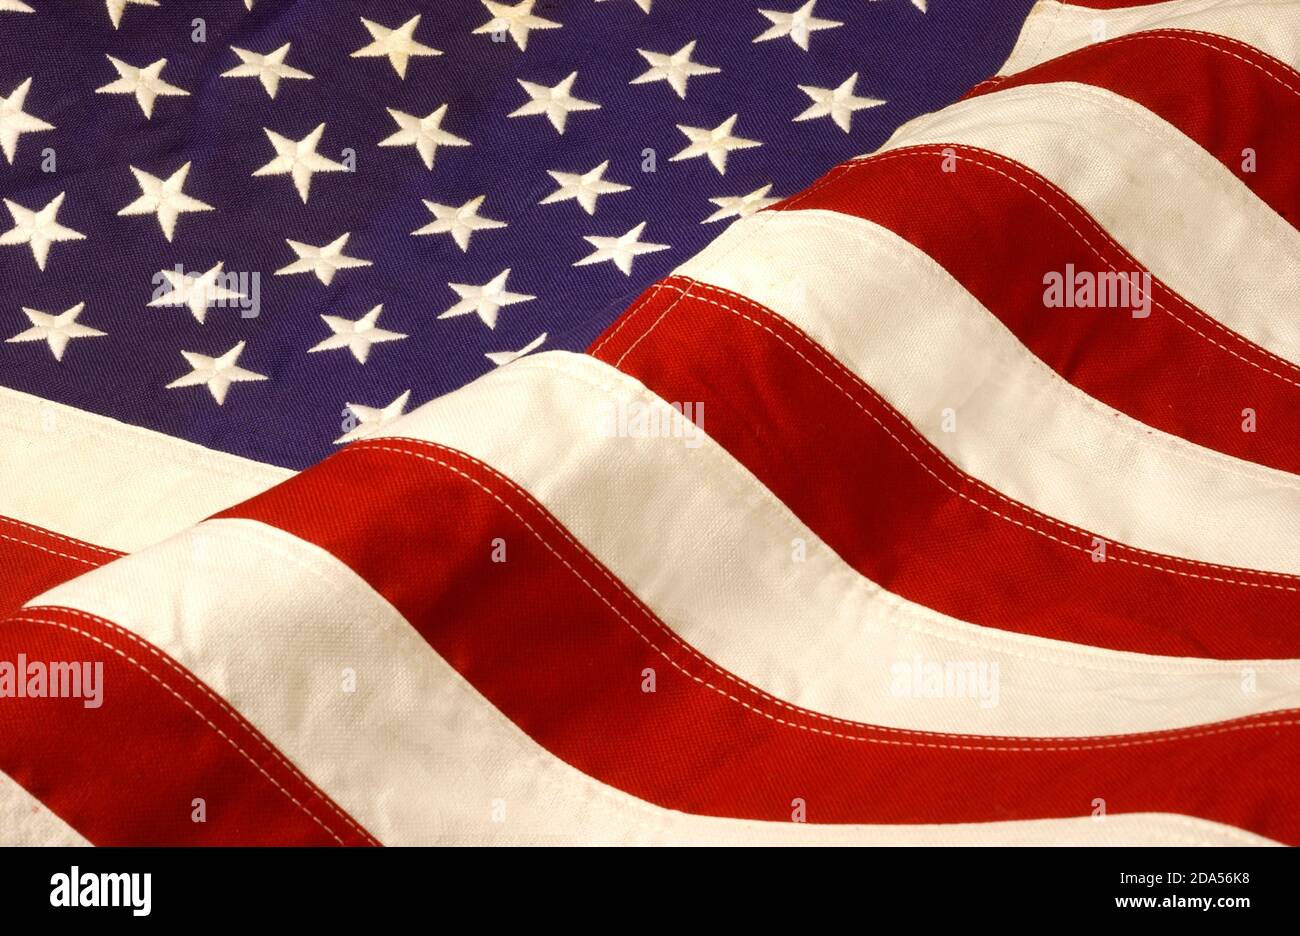 CLOSE-UP OF THE AMERICAN FLAG Stock Photo